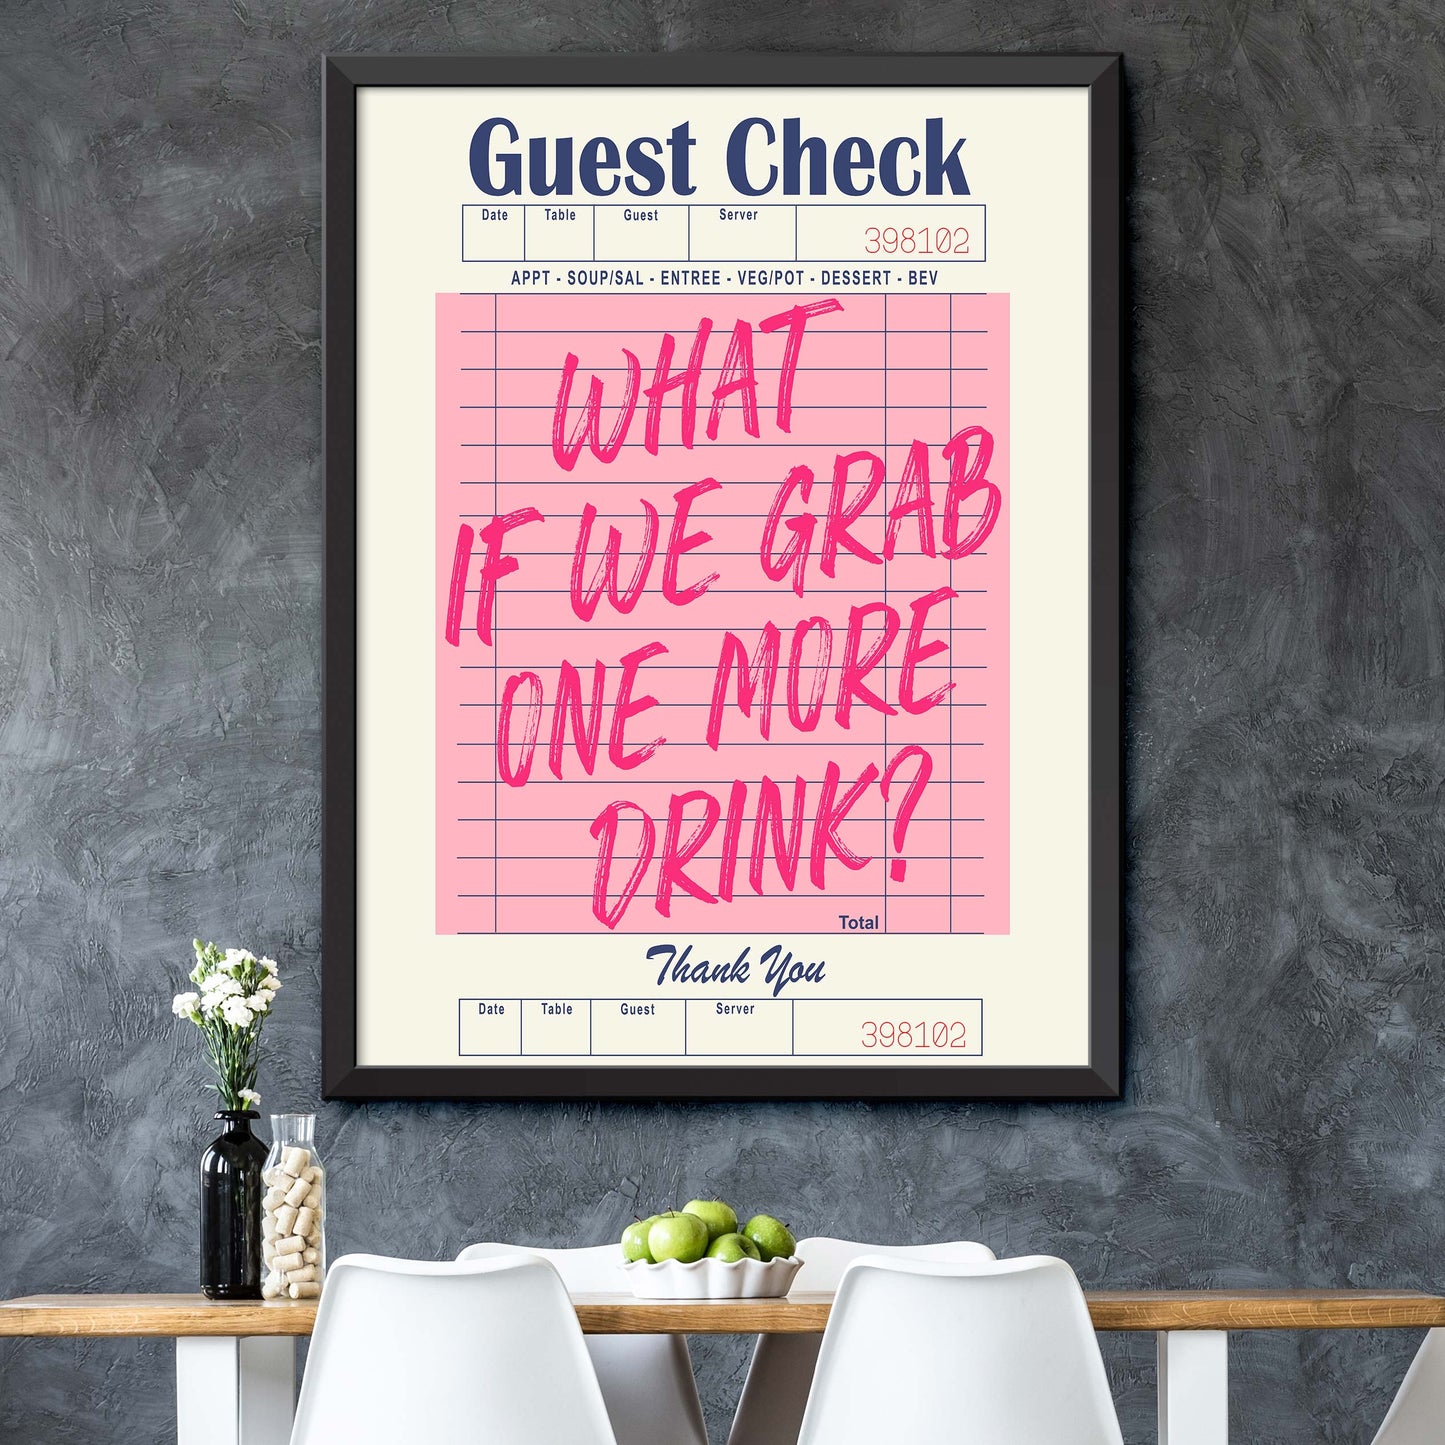 What If We Grab One More Drink!! Pink Poster